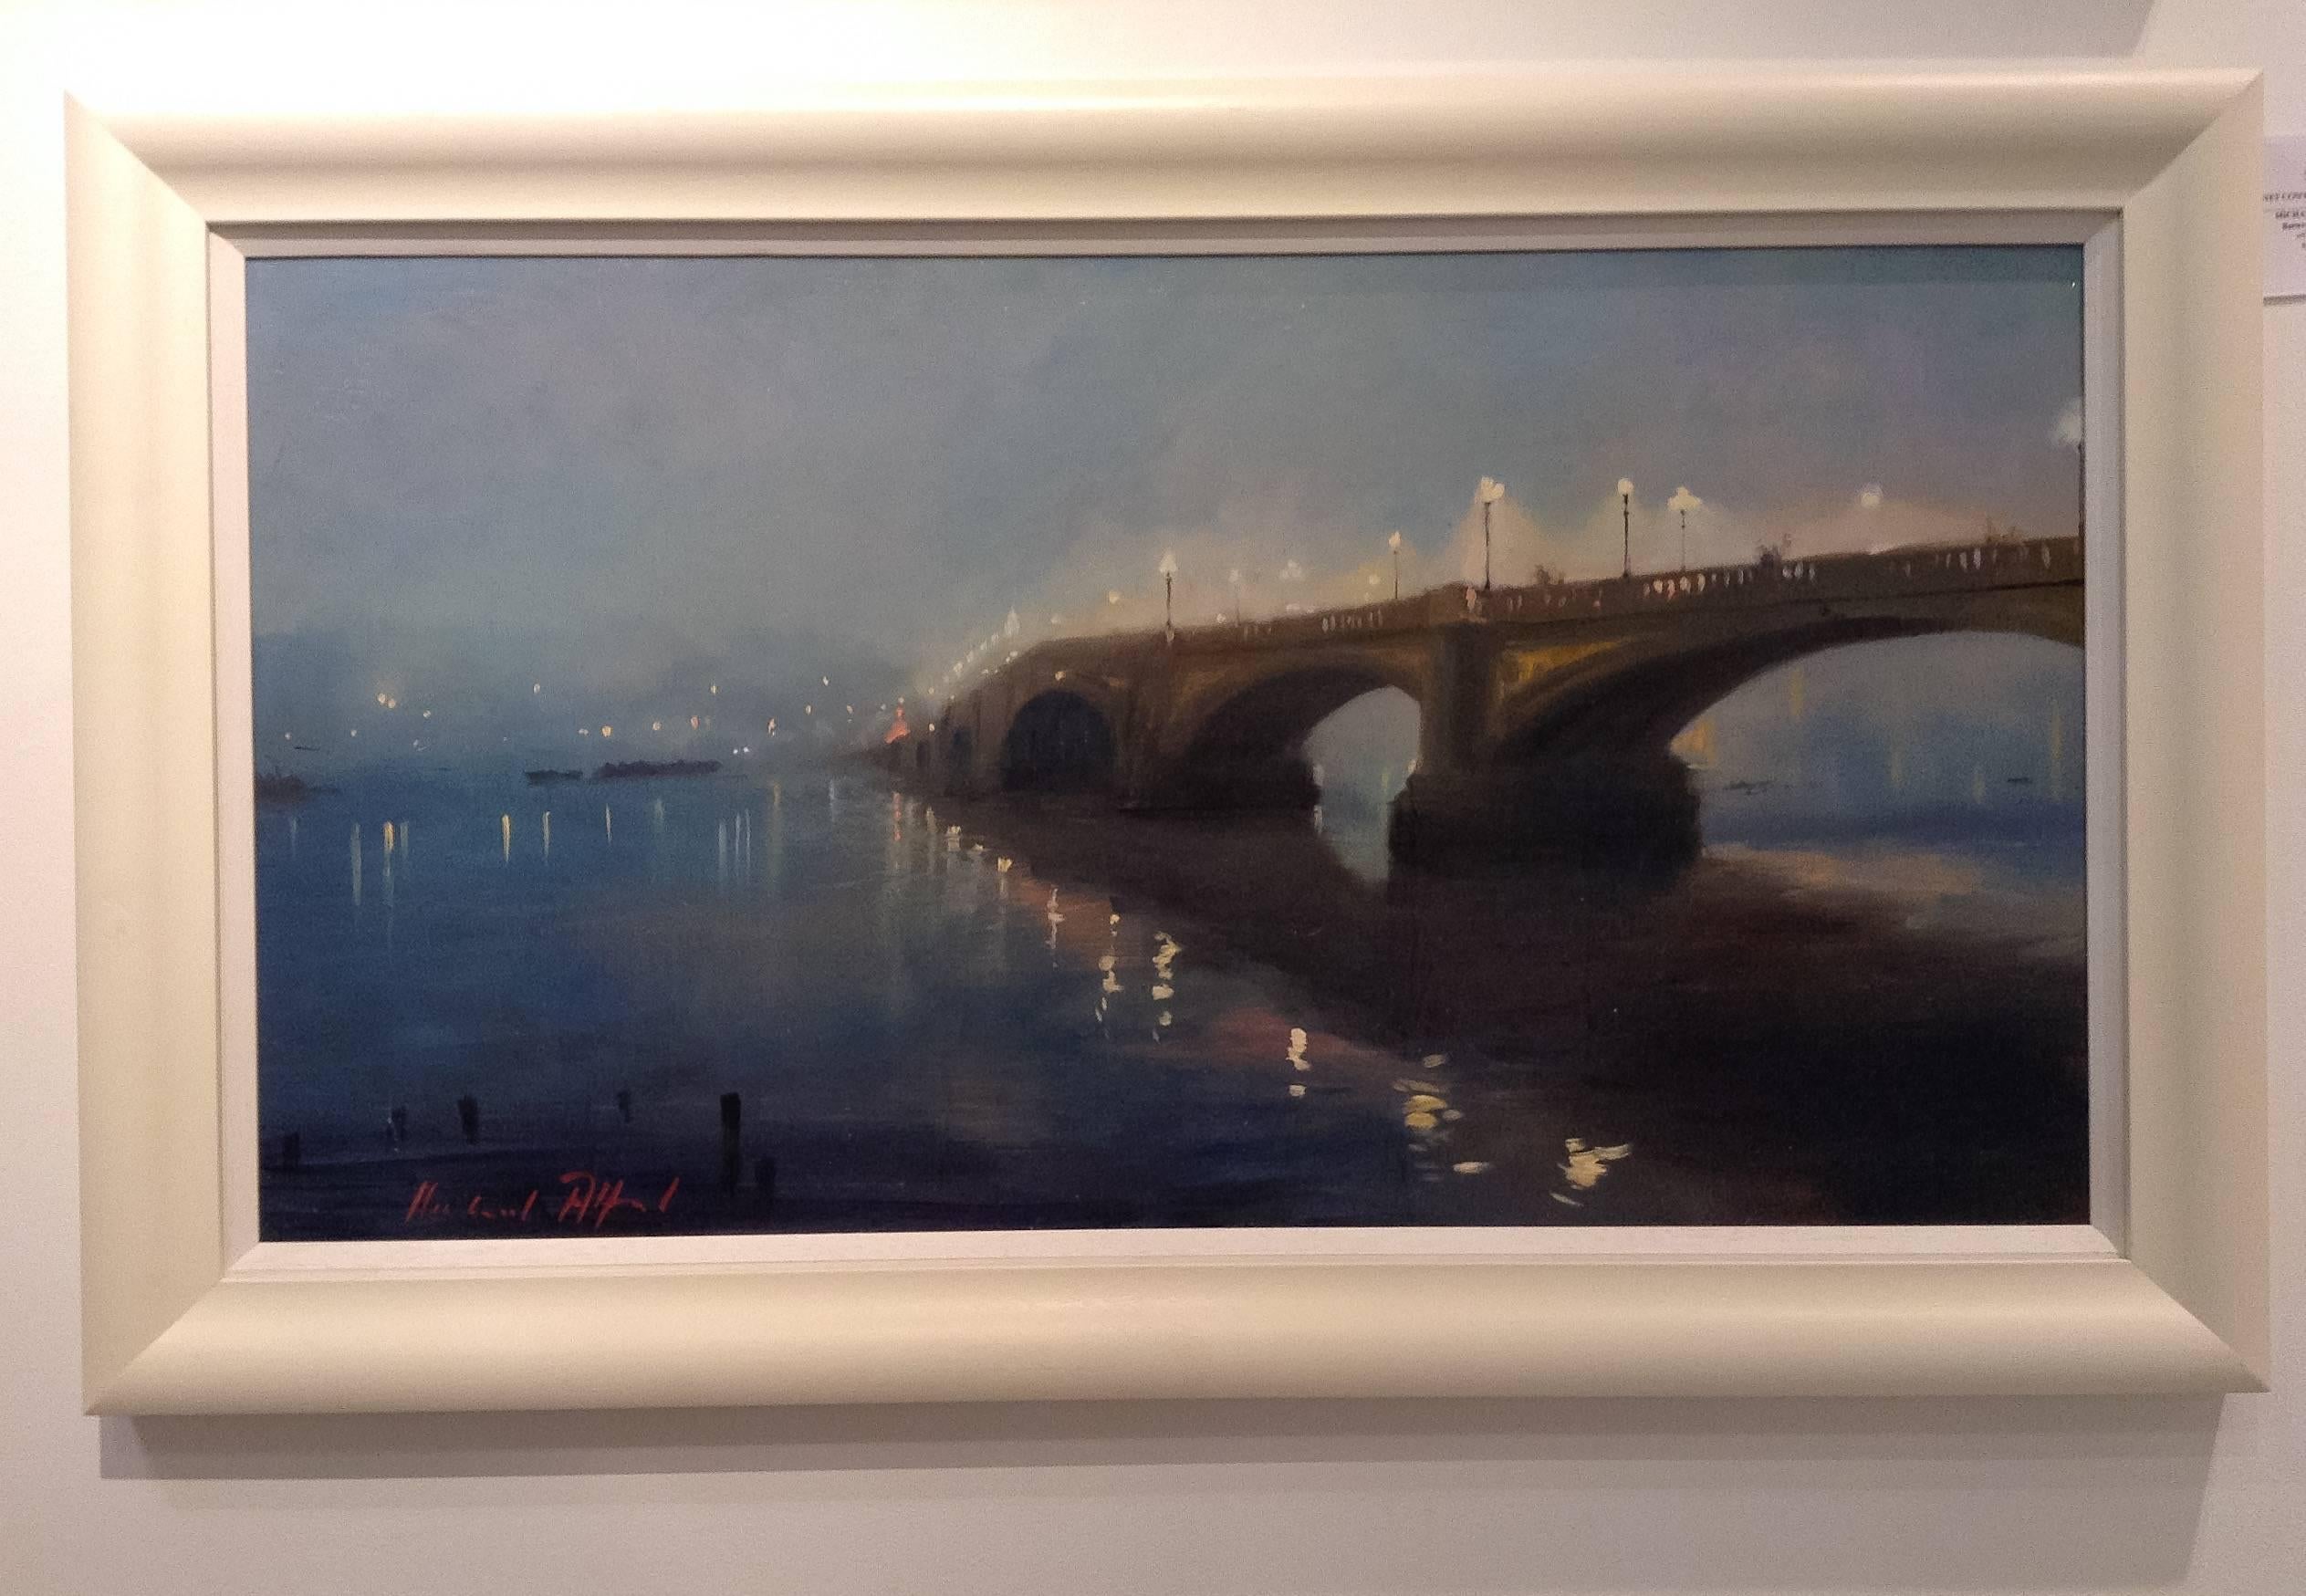 The original city landscape painting by Michael Alford is framed and ready to be displayed. The artist has incorporated a hazy background that successfully sets the scene of a misty evening by the river. 

 Michael’s varied body of work reflects his